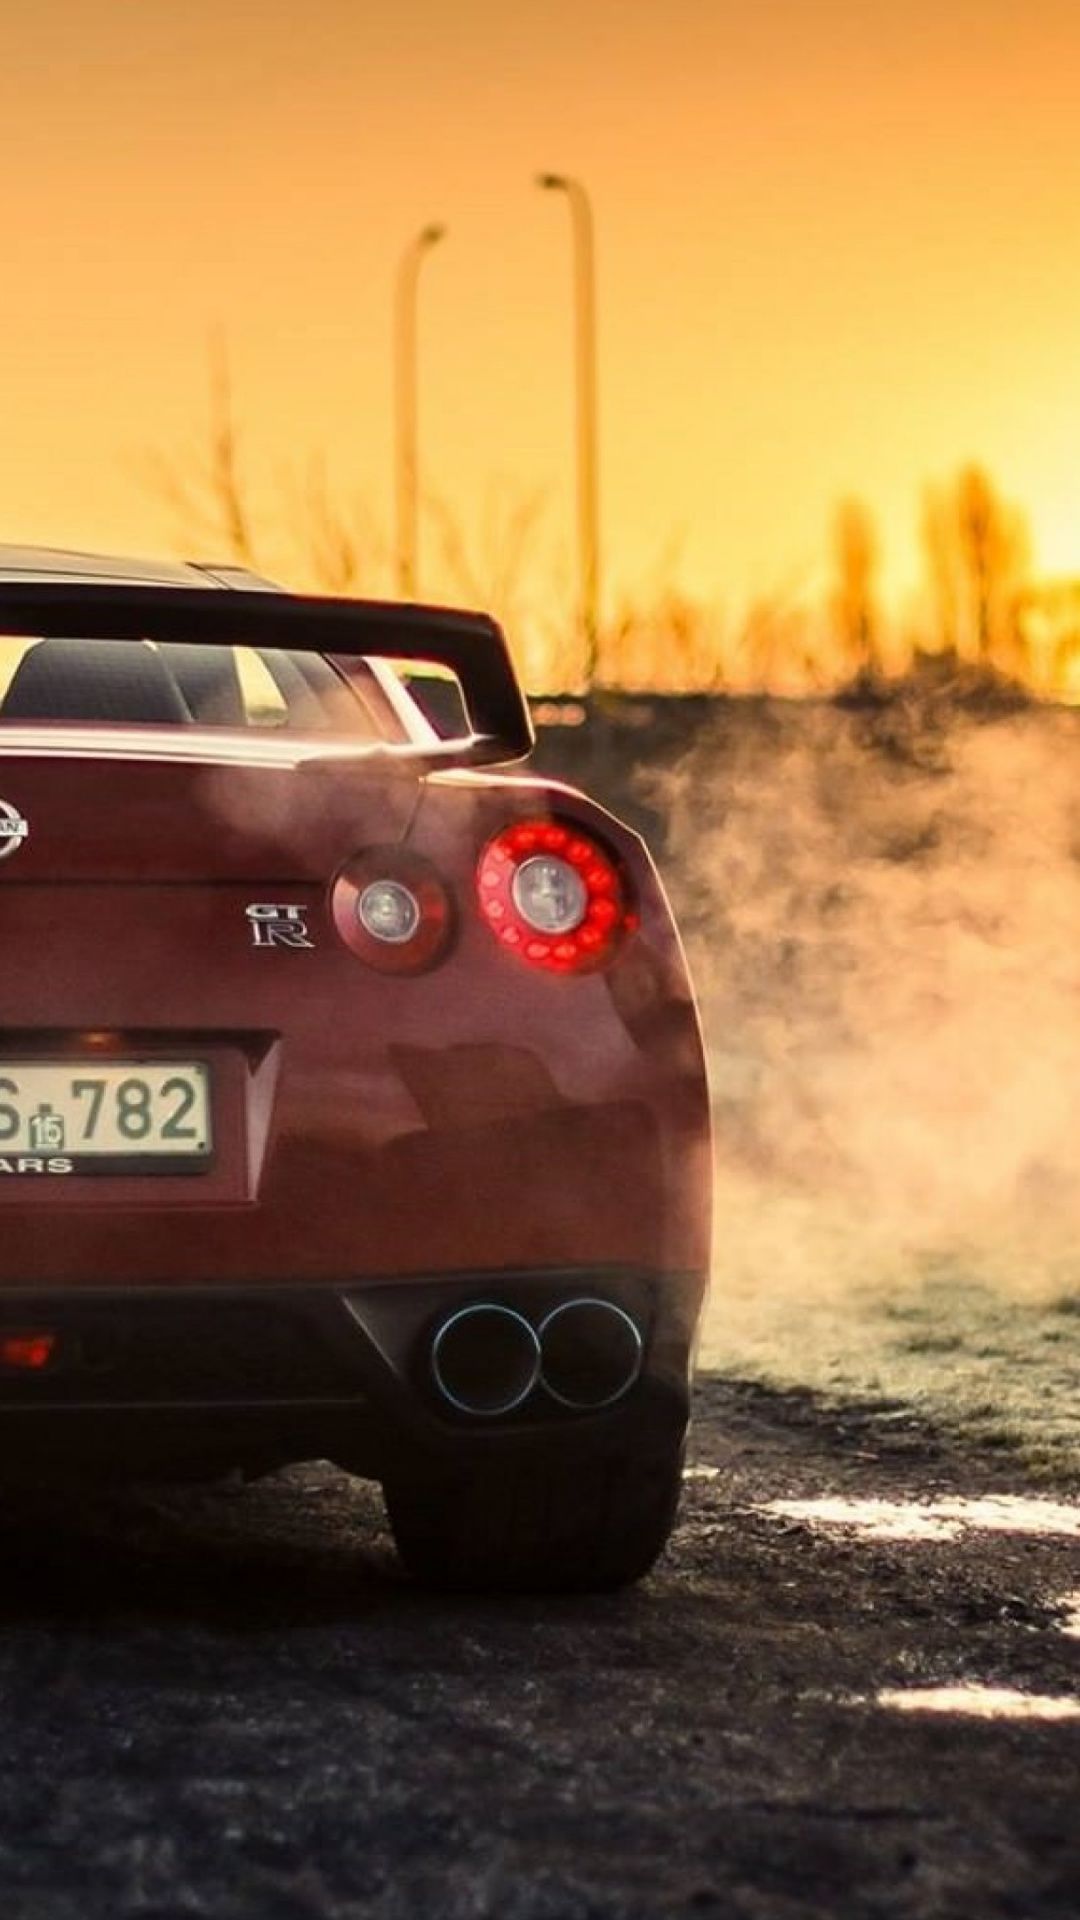 Nissan Gtr wallpaper for android